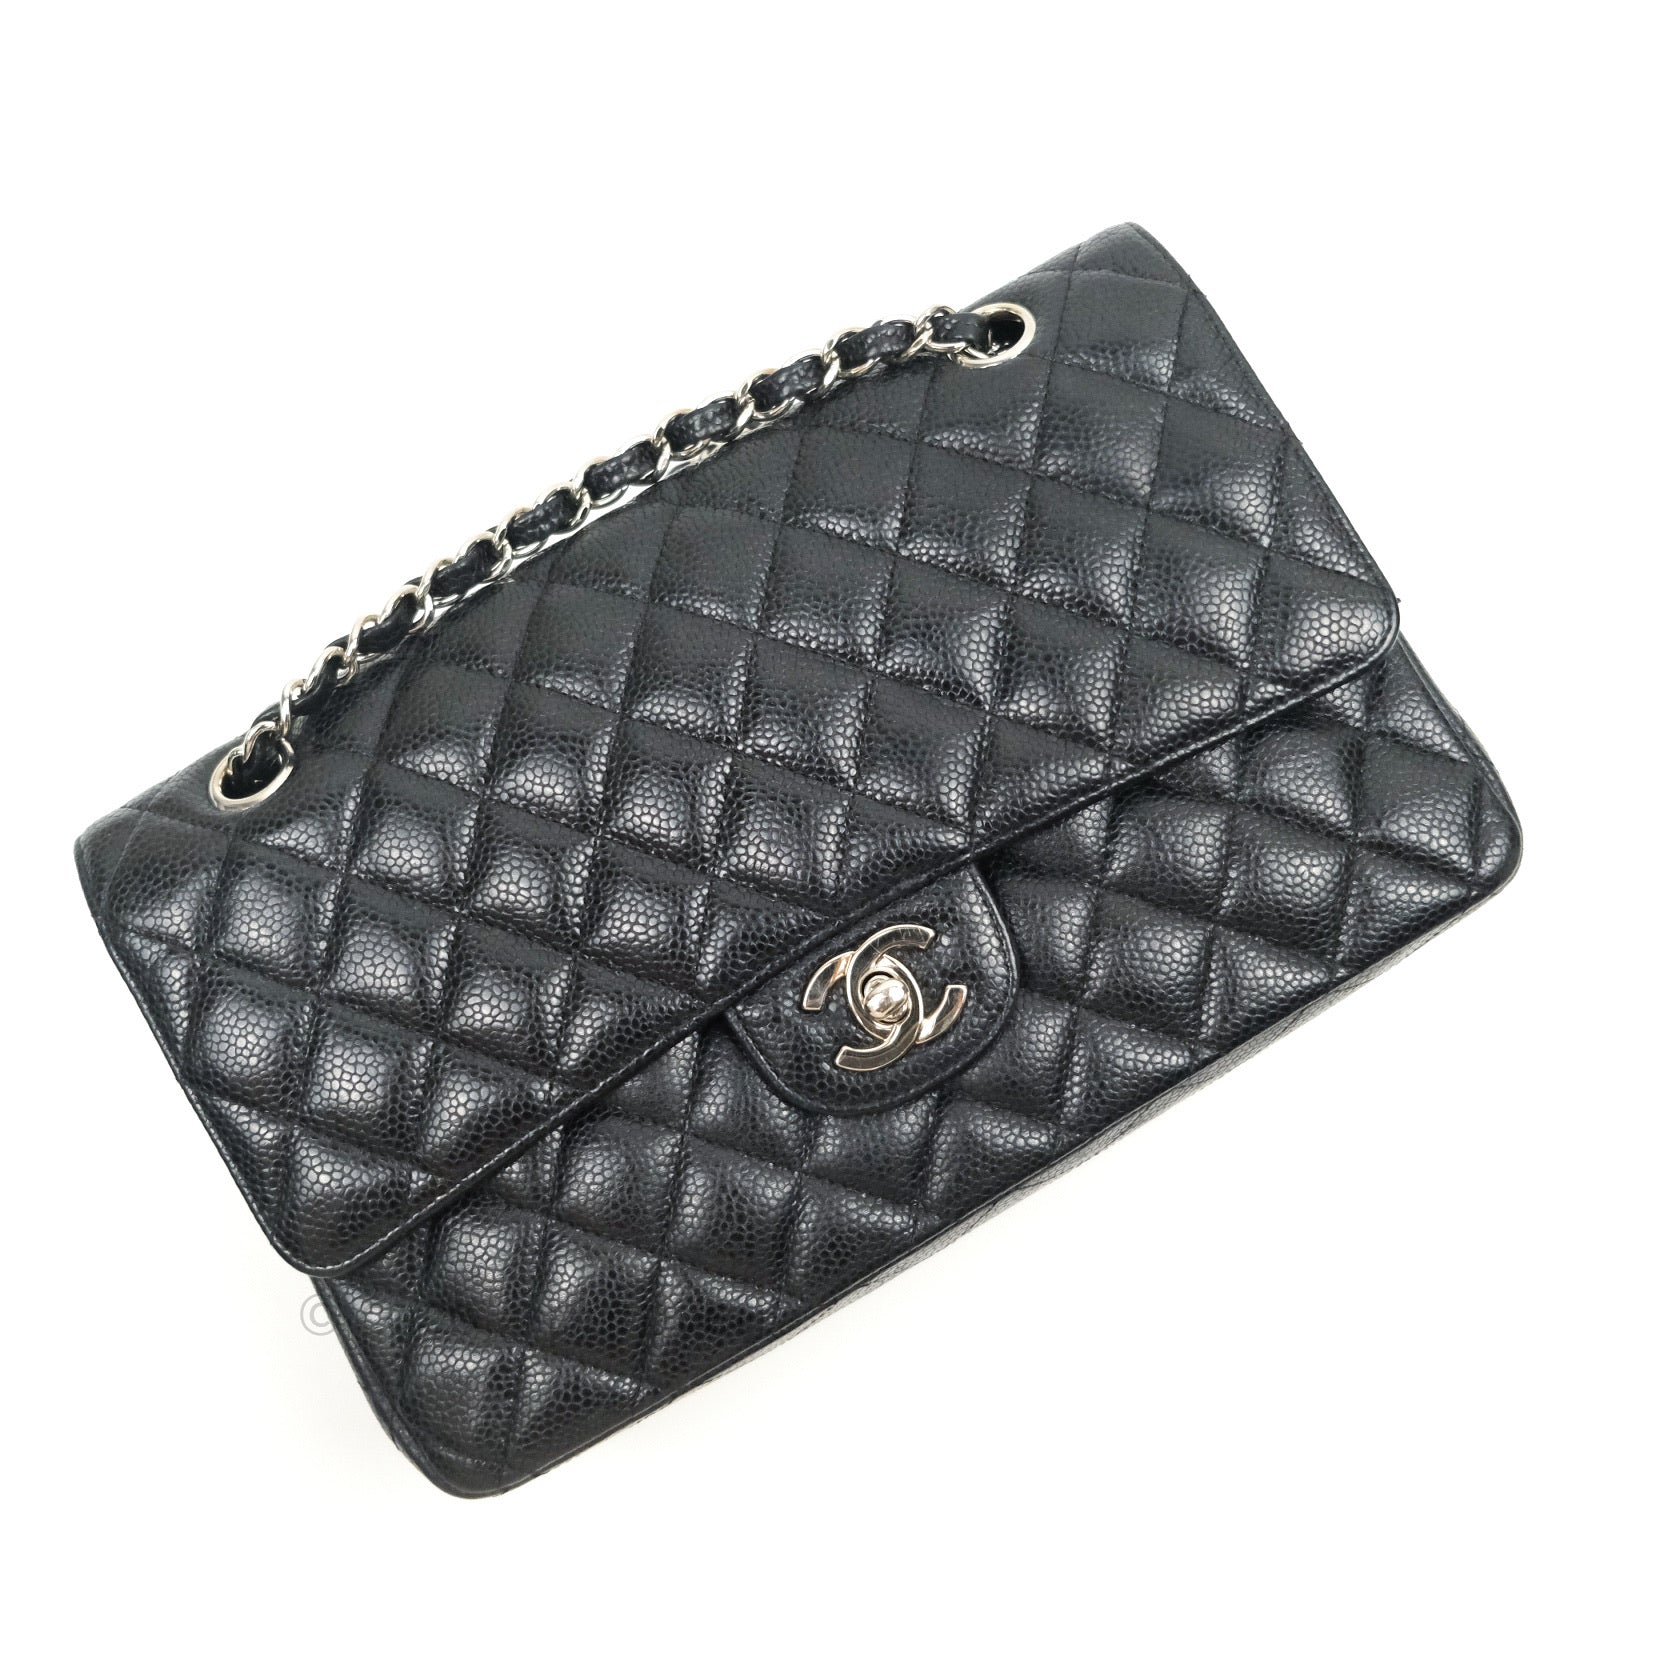 Chanel Black Caviar Classic Medium Double Flap Bag with Gold